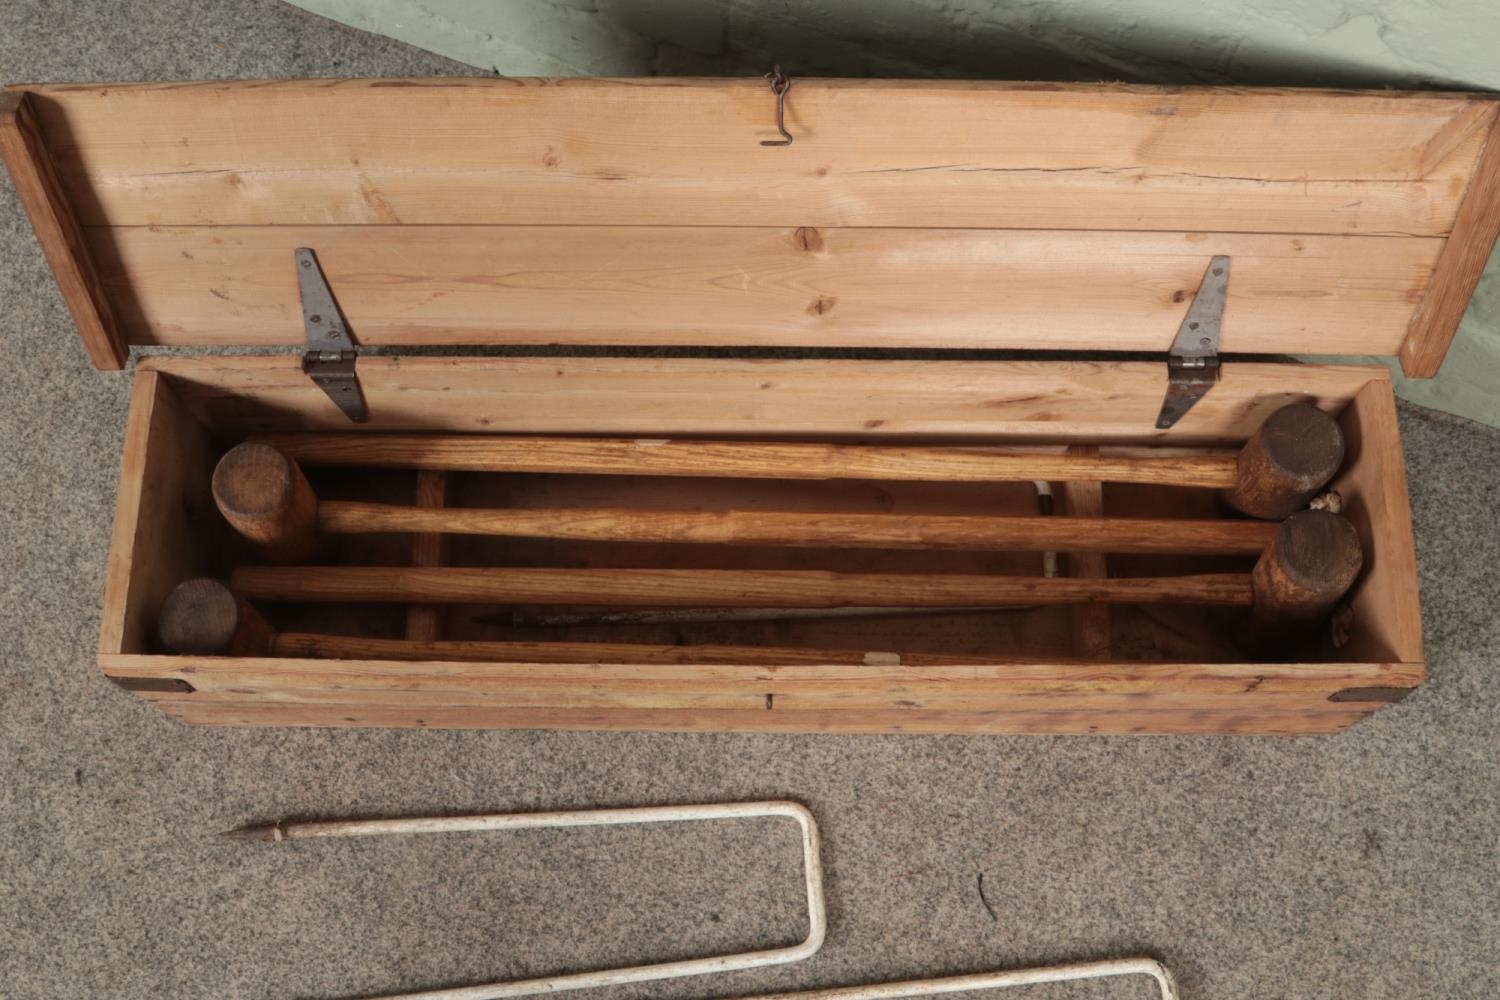 A vintage Croquet set with fitted wooden case. Missing balls. - Image 2 of 2